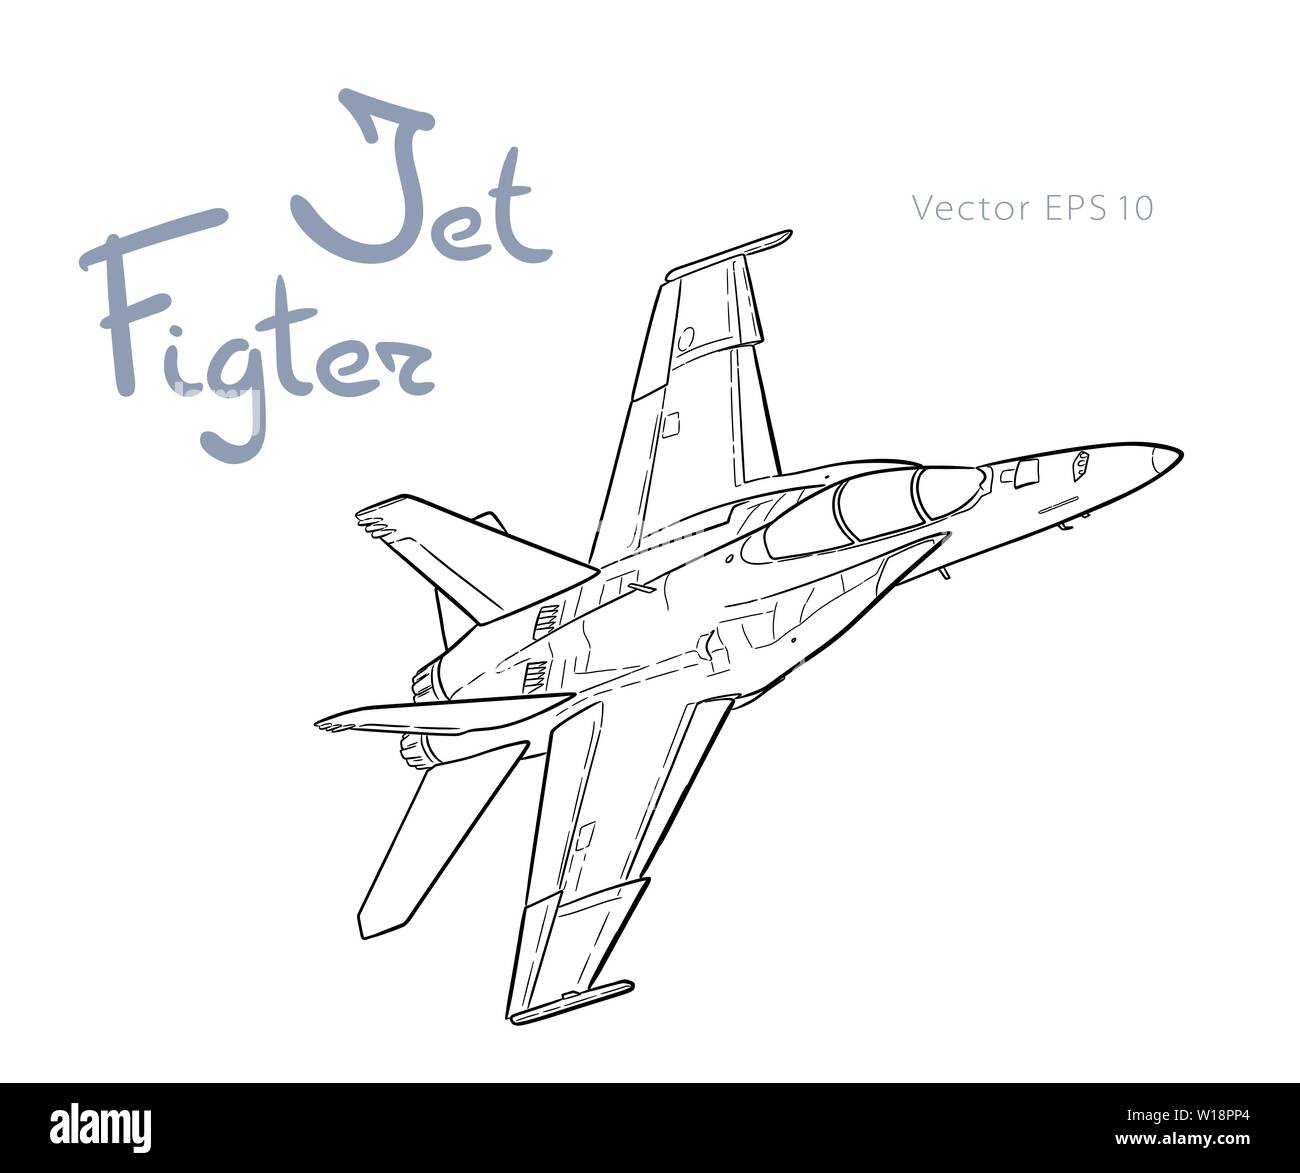 How to draw a jet: easy step by step, a jet fighter for beginners